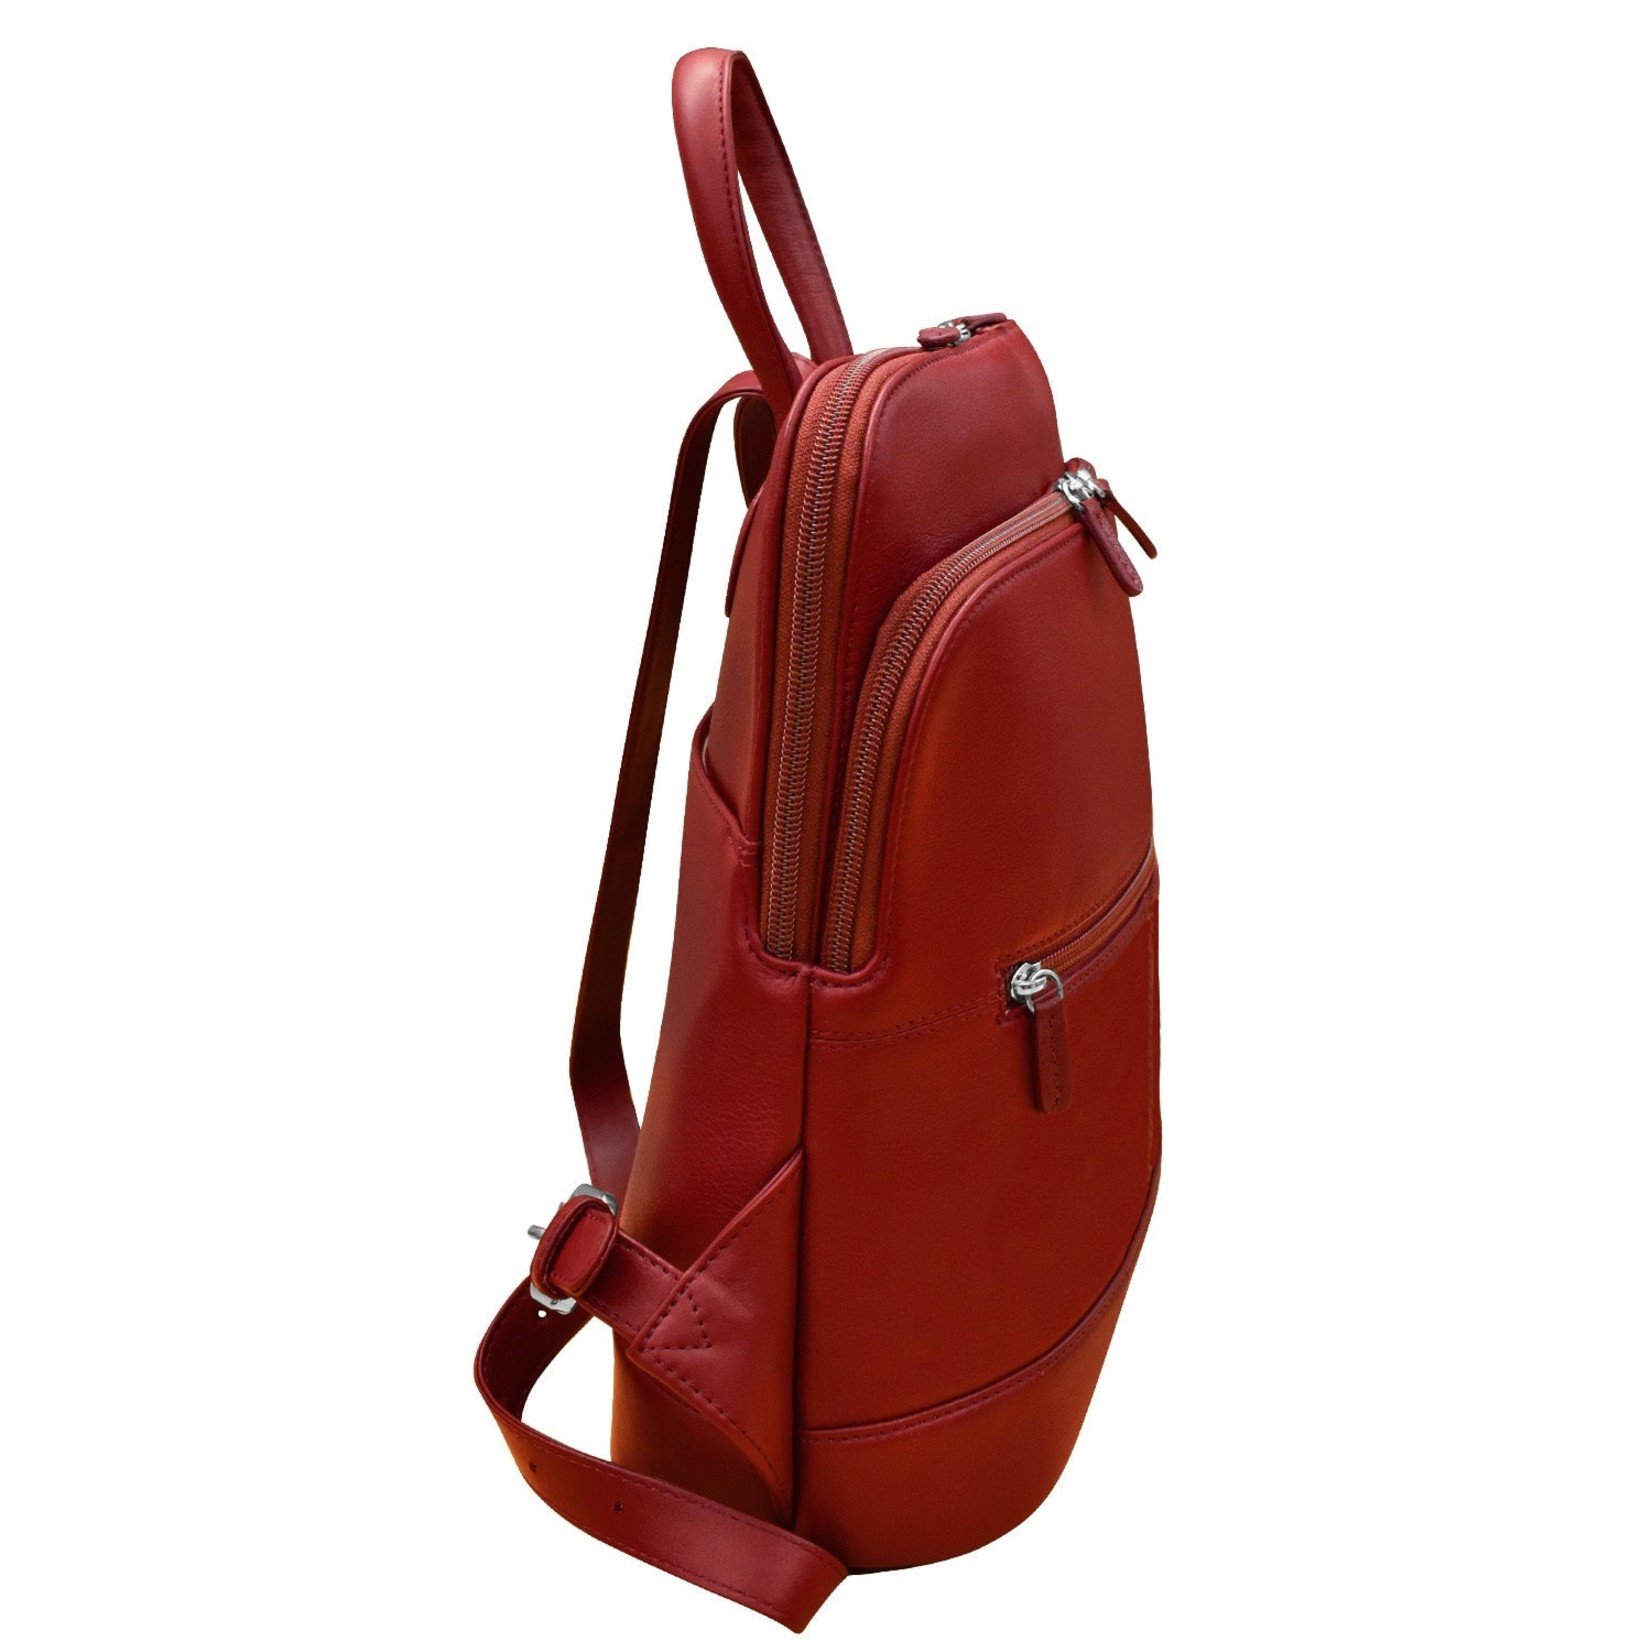 Leather Handbags and Accessories 6505 Red - Leather Backpack